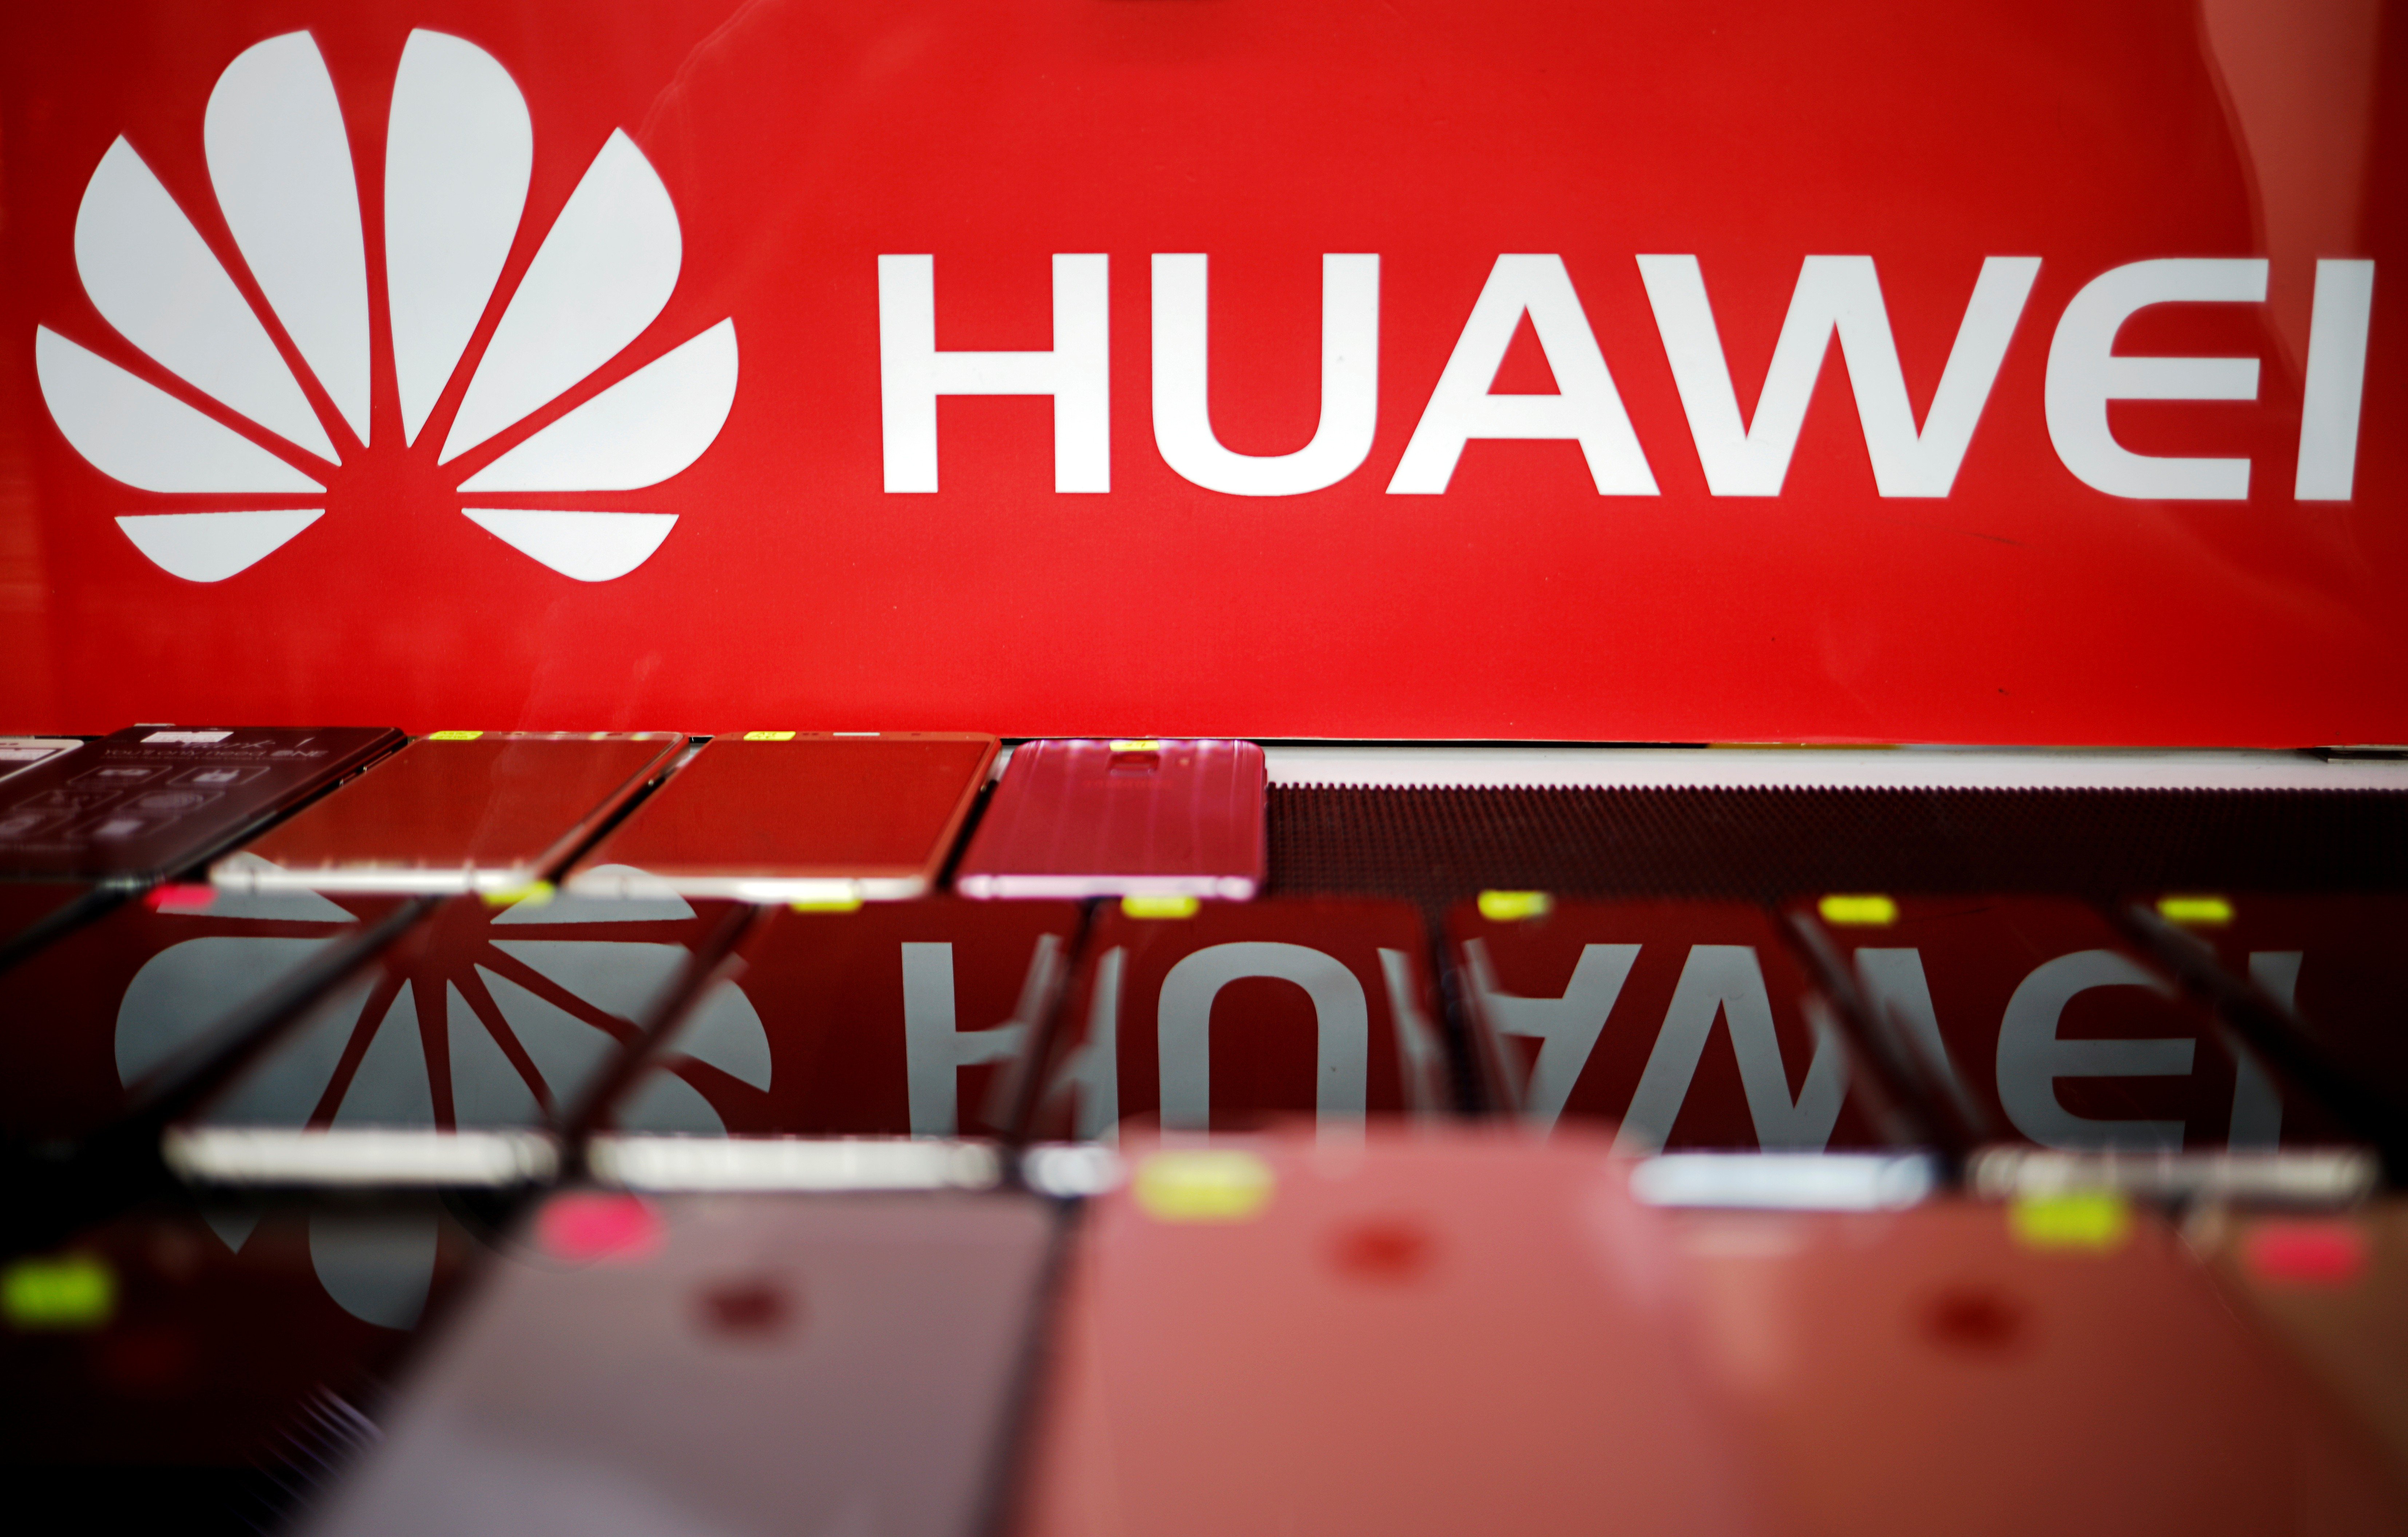 The logo of Huawei Technologies is pictured at a smartphone shop in Singapore on May 21, 2019. Photo: Reuters